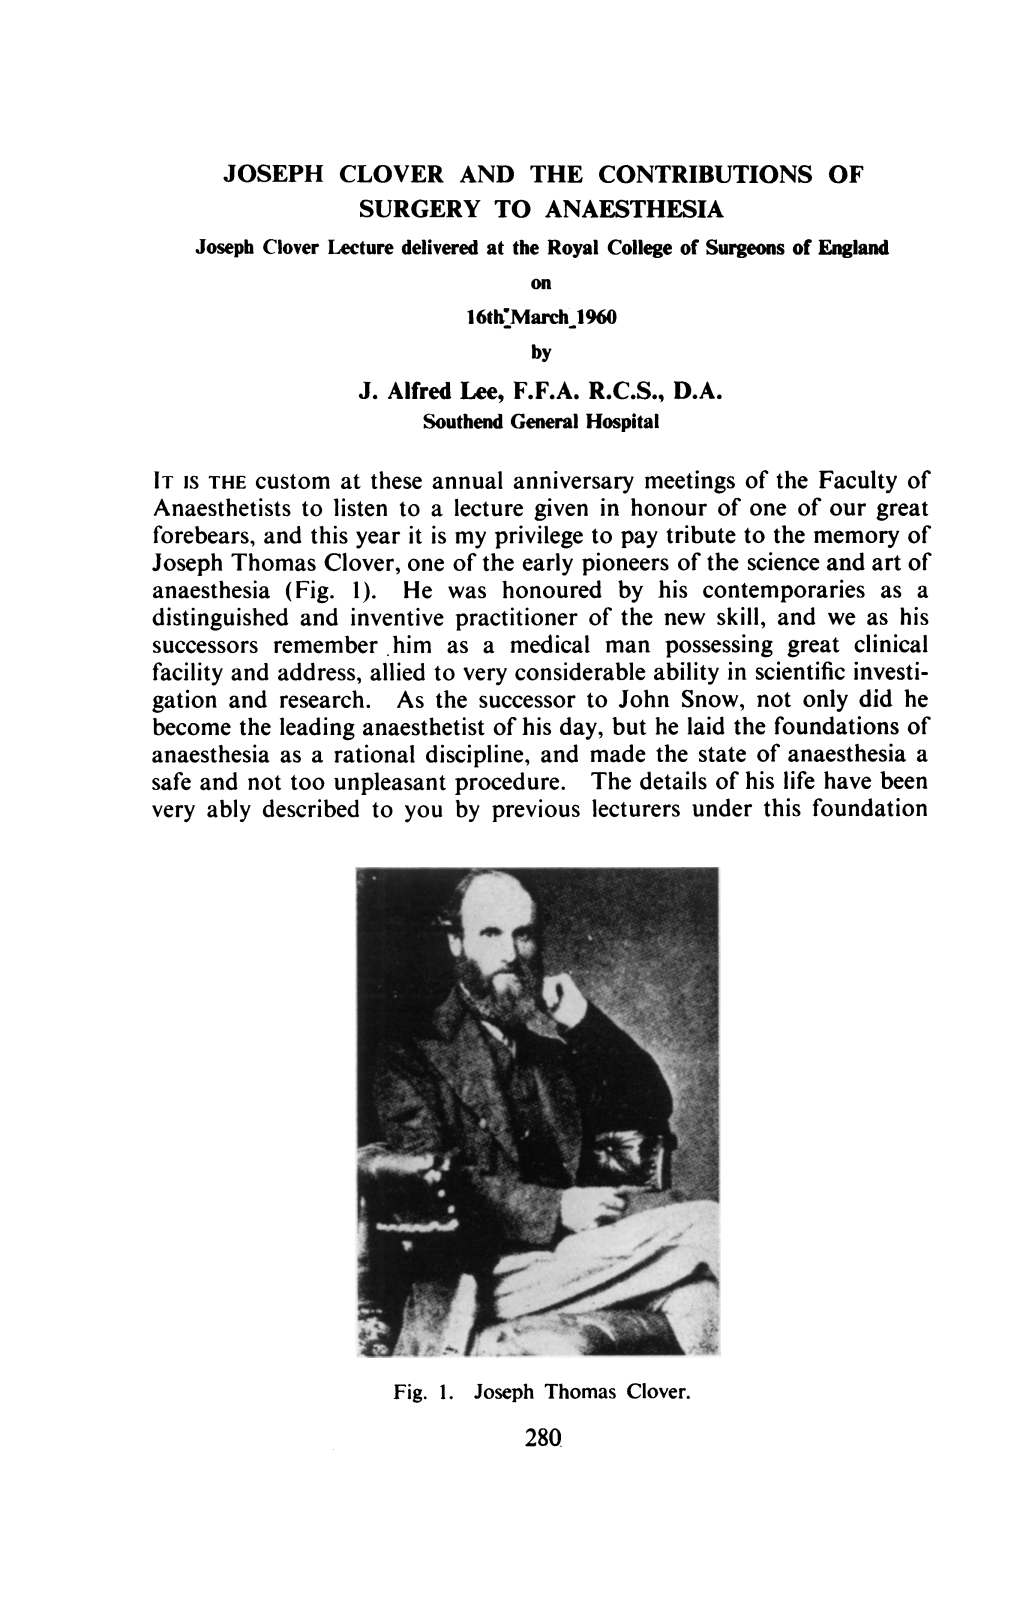 Forebears, and This Year It Is My Privilege to Pay Tribute to the Memory of Joseph Thomas Clover, One of the Early Pioneers of the Science and Art of Anaesthesia (Fig